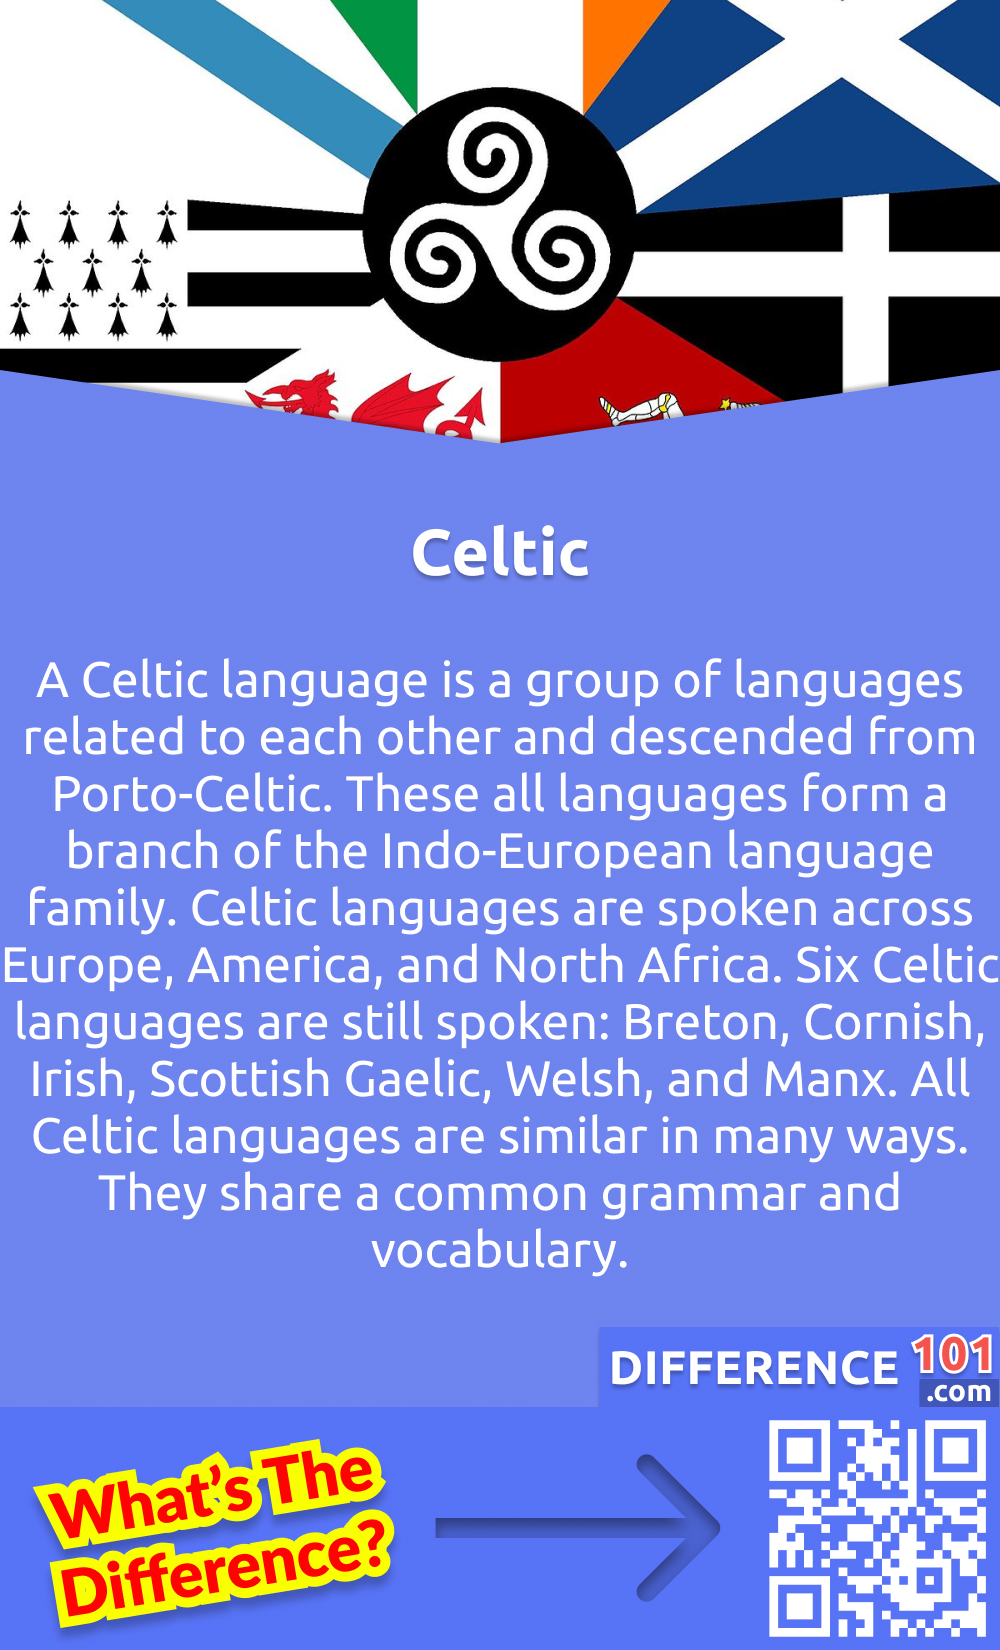 What Is Celtic Language? A Celtic language is a group of languages related to each other and descended from Porto-Celtic. These all languages form a branch of the Indo-European language family. Celtic languages are spoken across Europe, America, and North Africa. Six Celtic languages are still spoken: Breton, Cornish, Irish, Scottish Gaelic, Welsh, and Manx. All Celtic languages are similar in many ways. They share a common grammar and vocabulary.